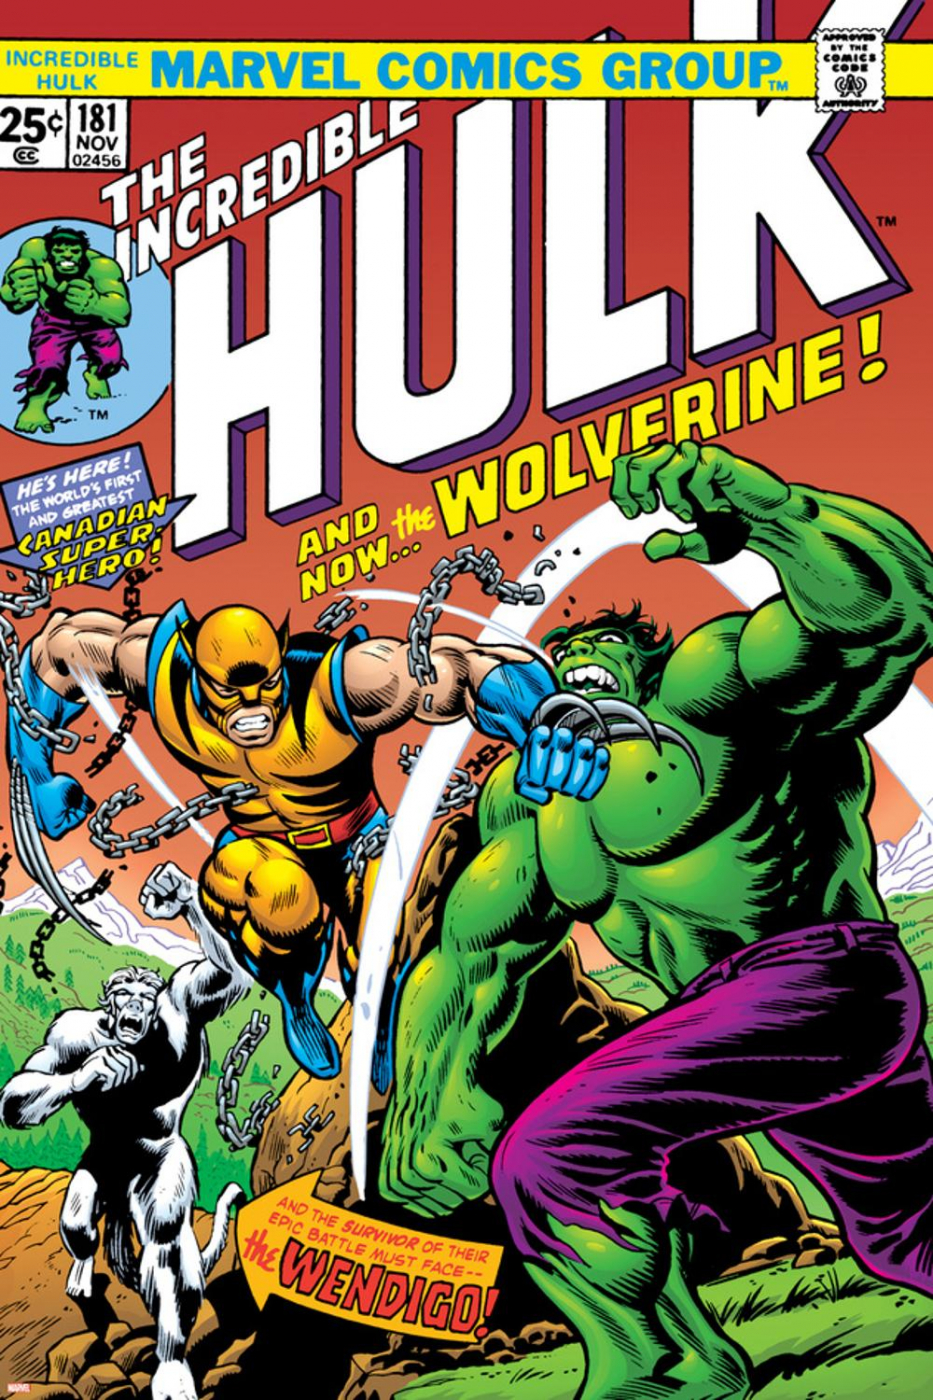 FAQ Home Shipping Return & Refund About Contact Contact Us User Sign Up Log In Cart Empty Cart Online Shop → Search→ Marvel Comics Retro: The. Marvel Comics Retro: The Incredible Hulk Comic Book Cover No. with Wolverine and